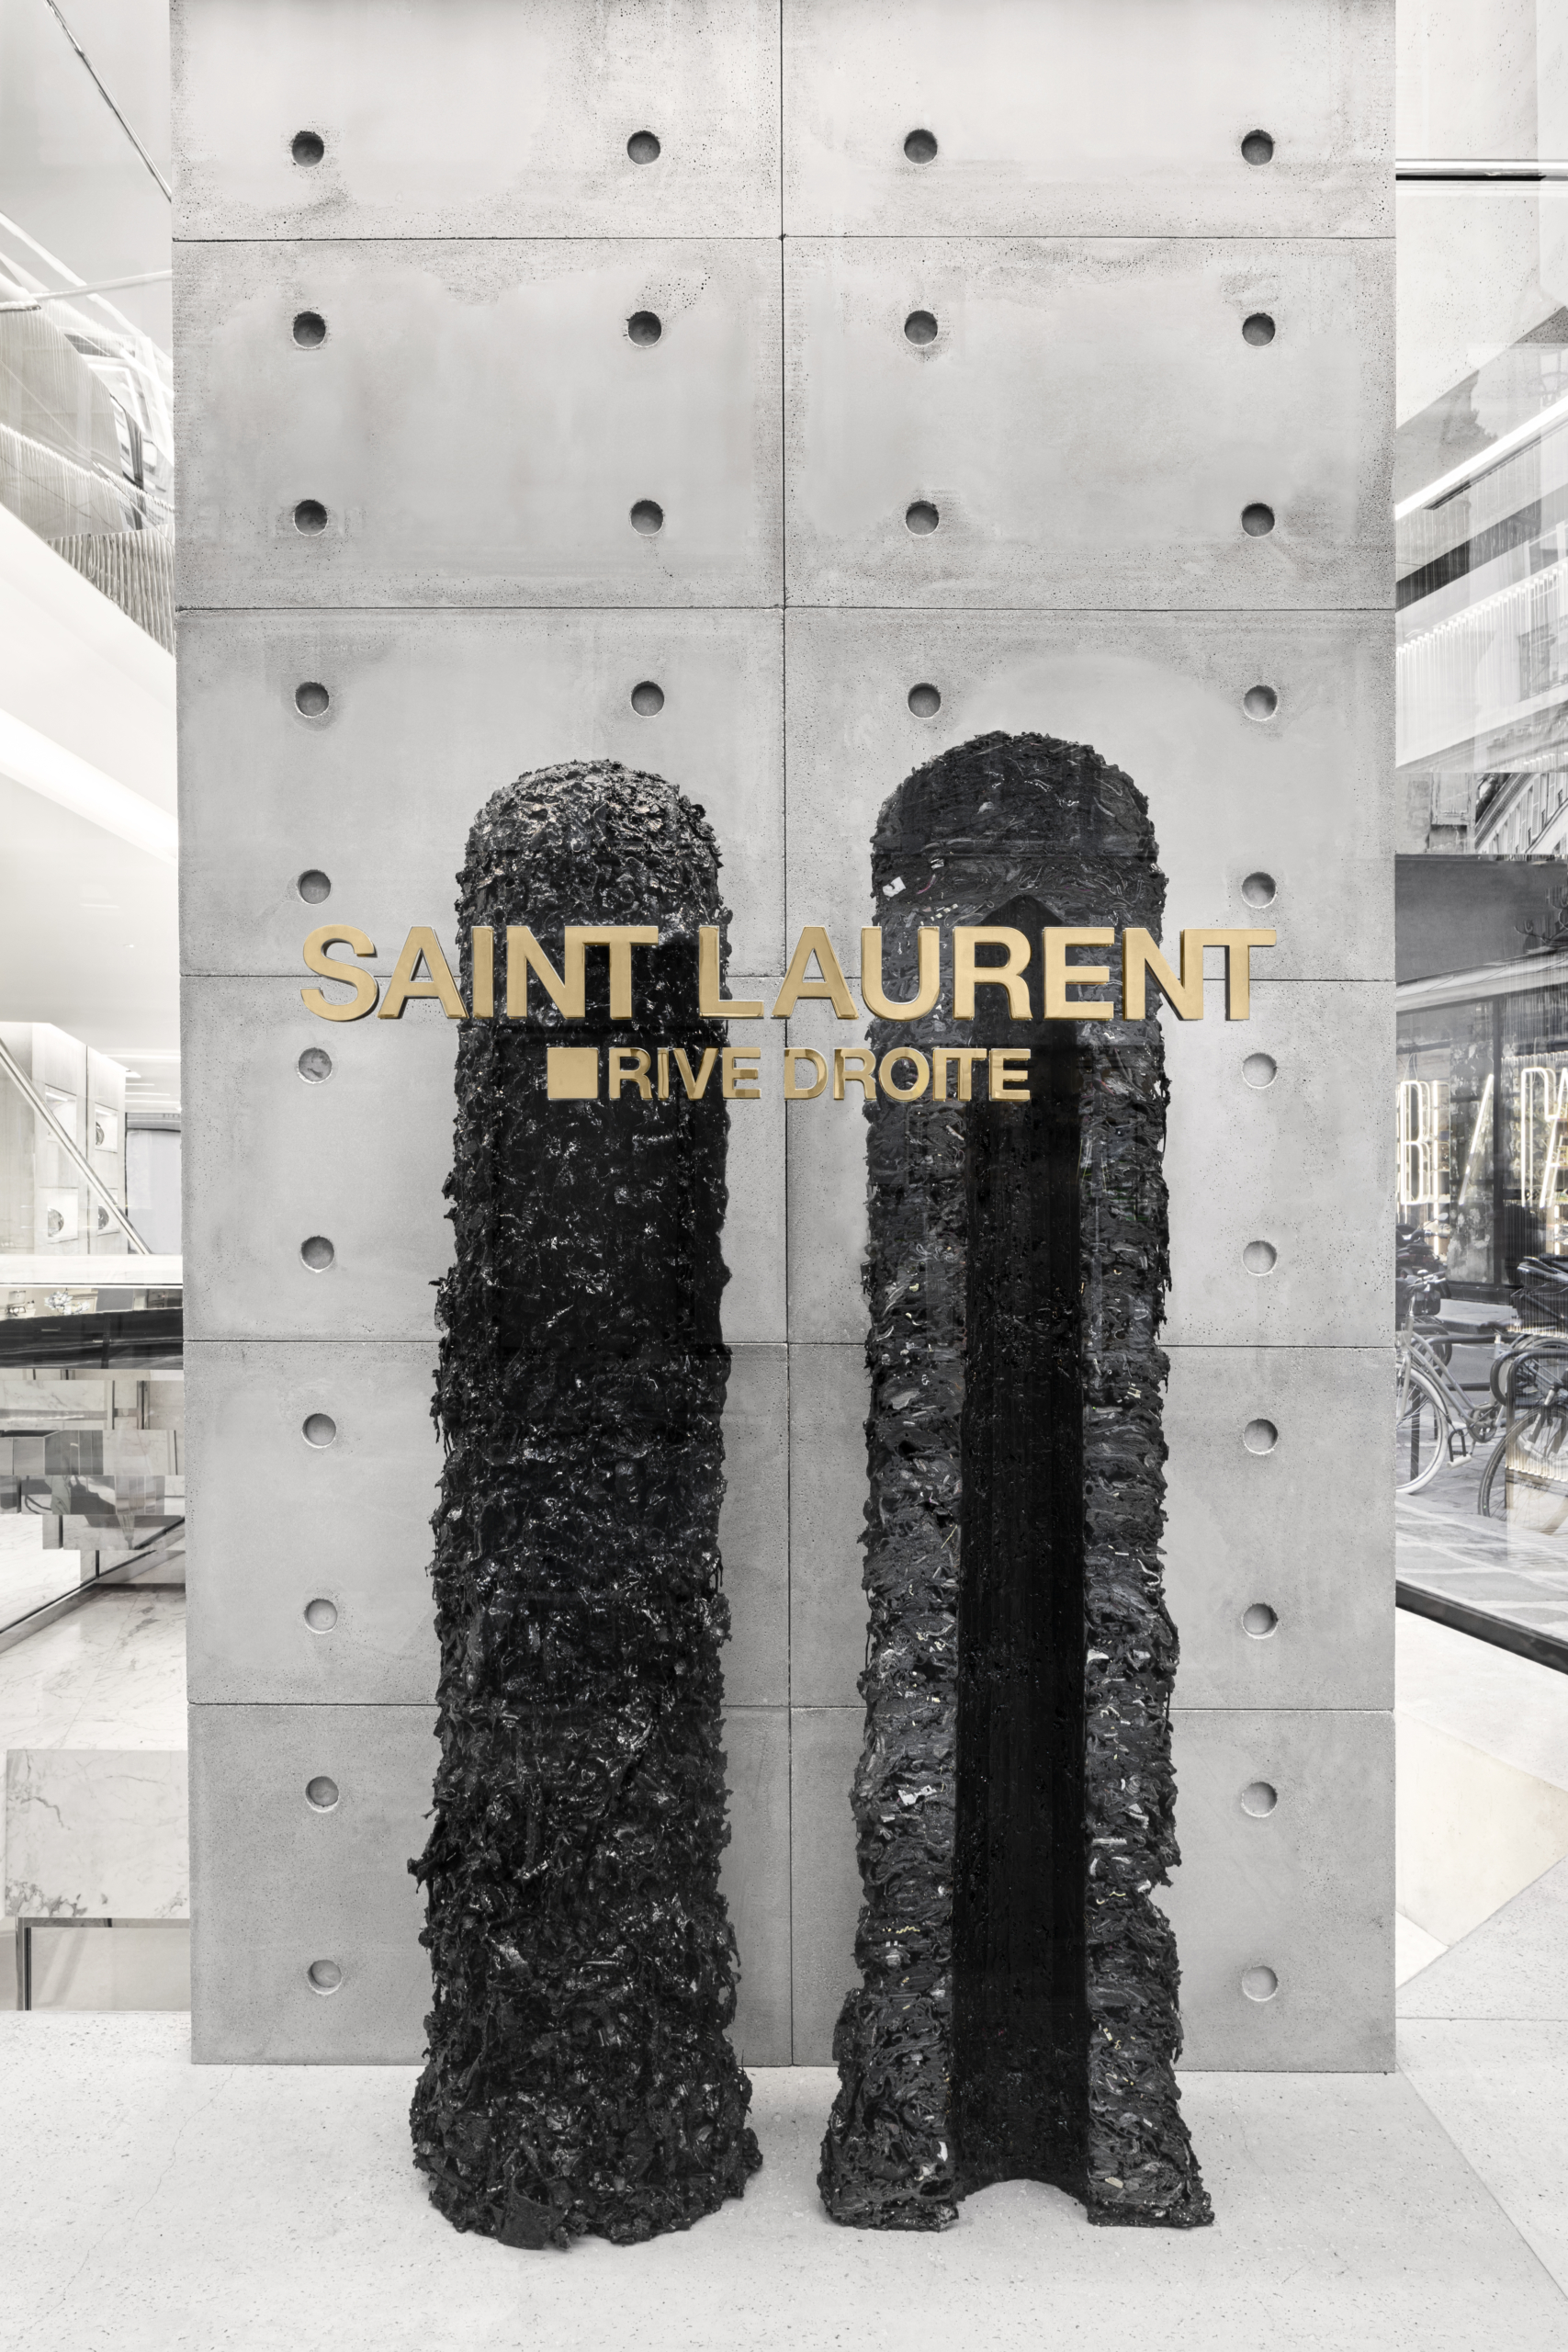 Saint Laurent Rive Droite, Curated by Helmut Lang and Anthony Vaccarello